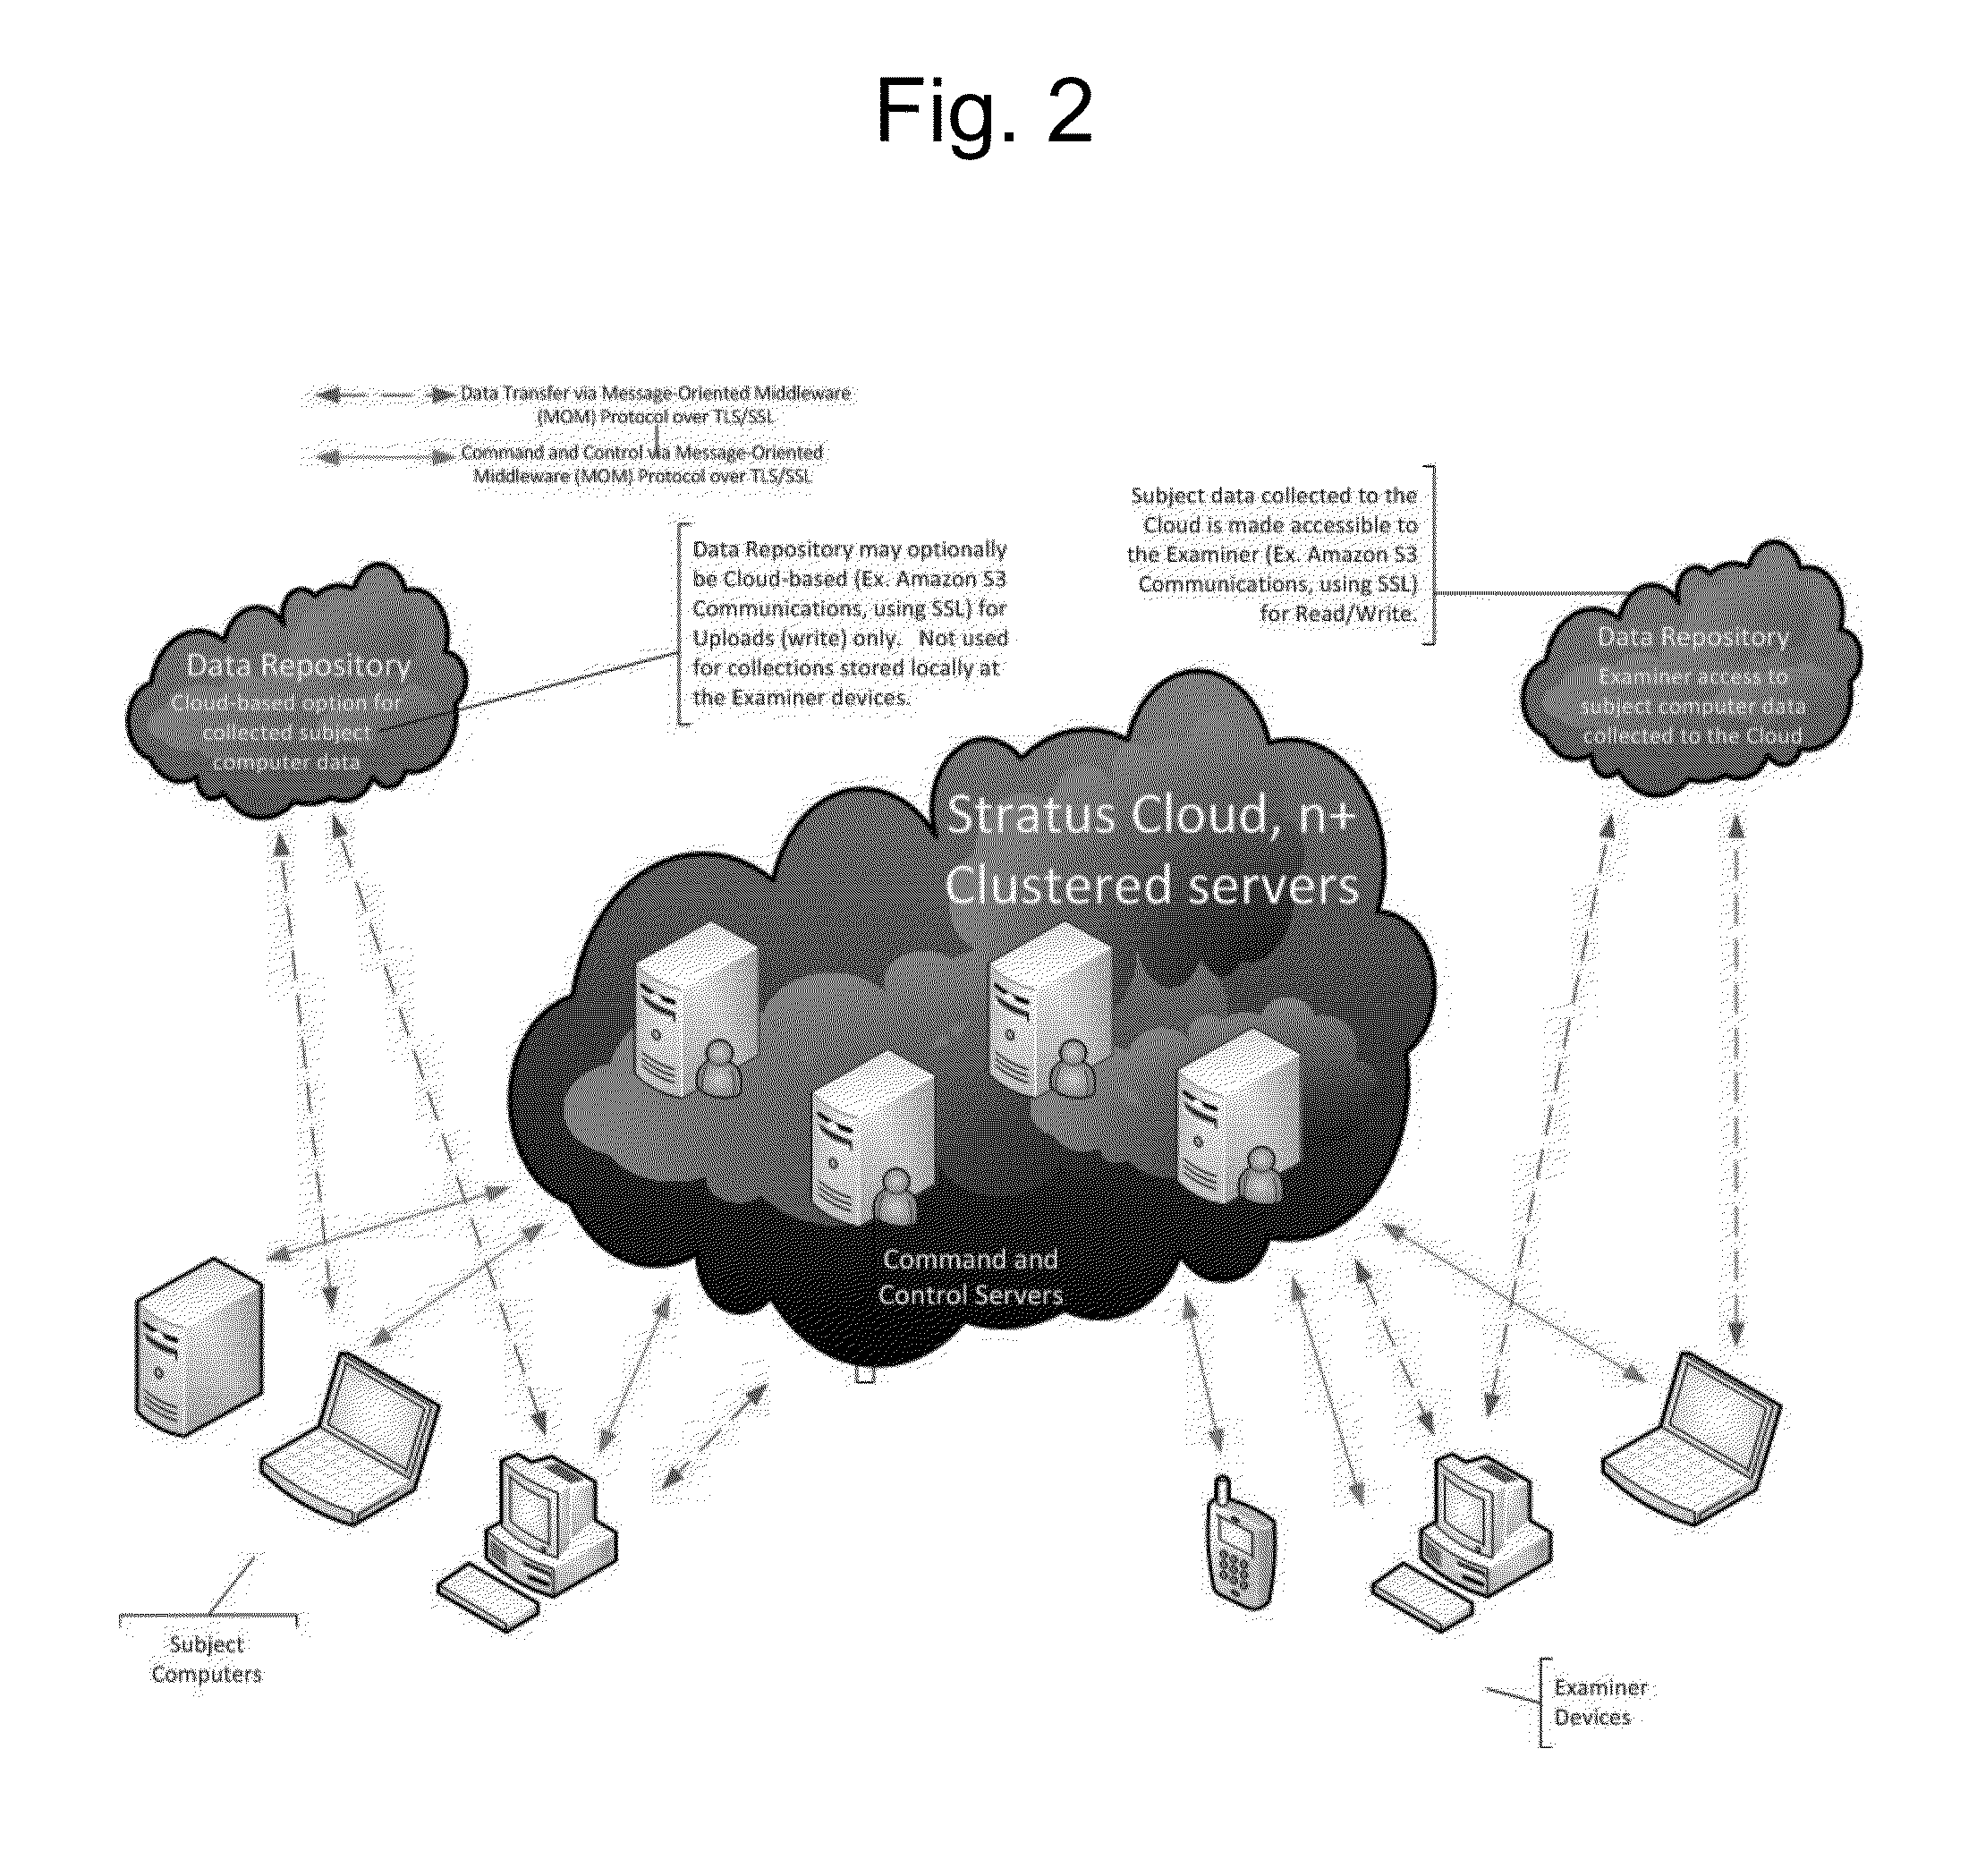 Systems and methods for provisioning digital forensics services remotely over public and private networks